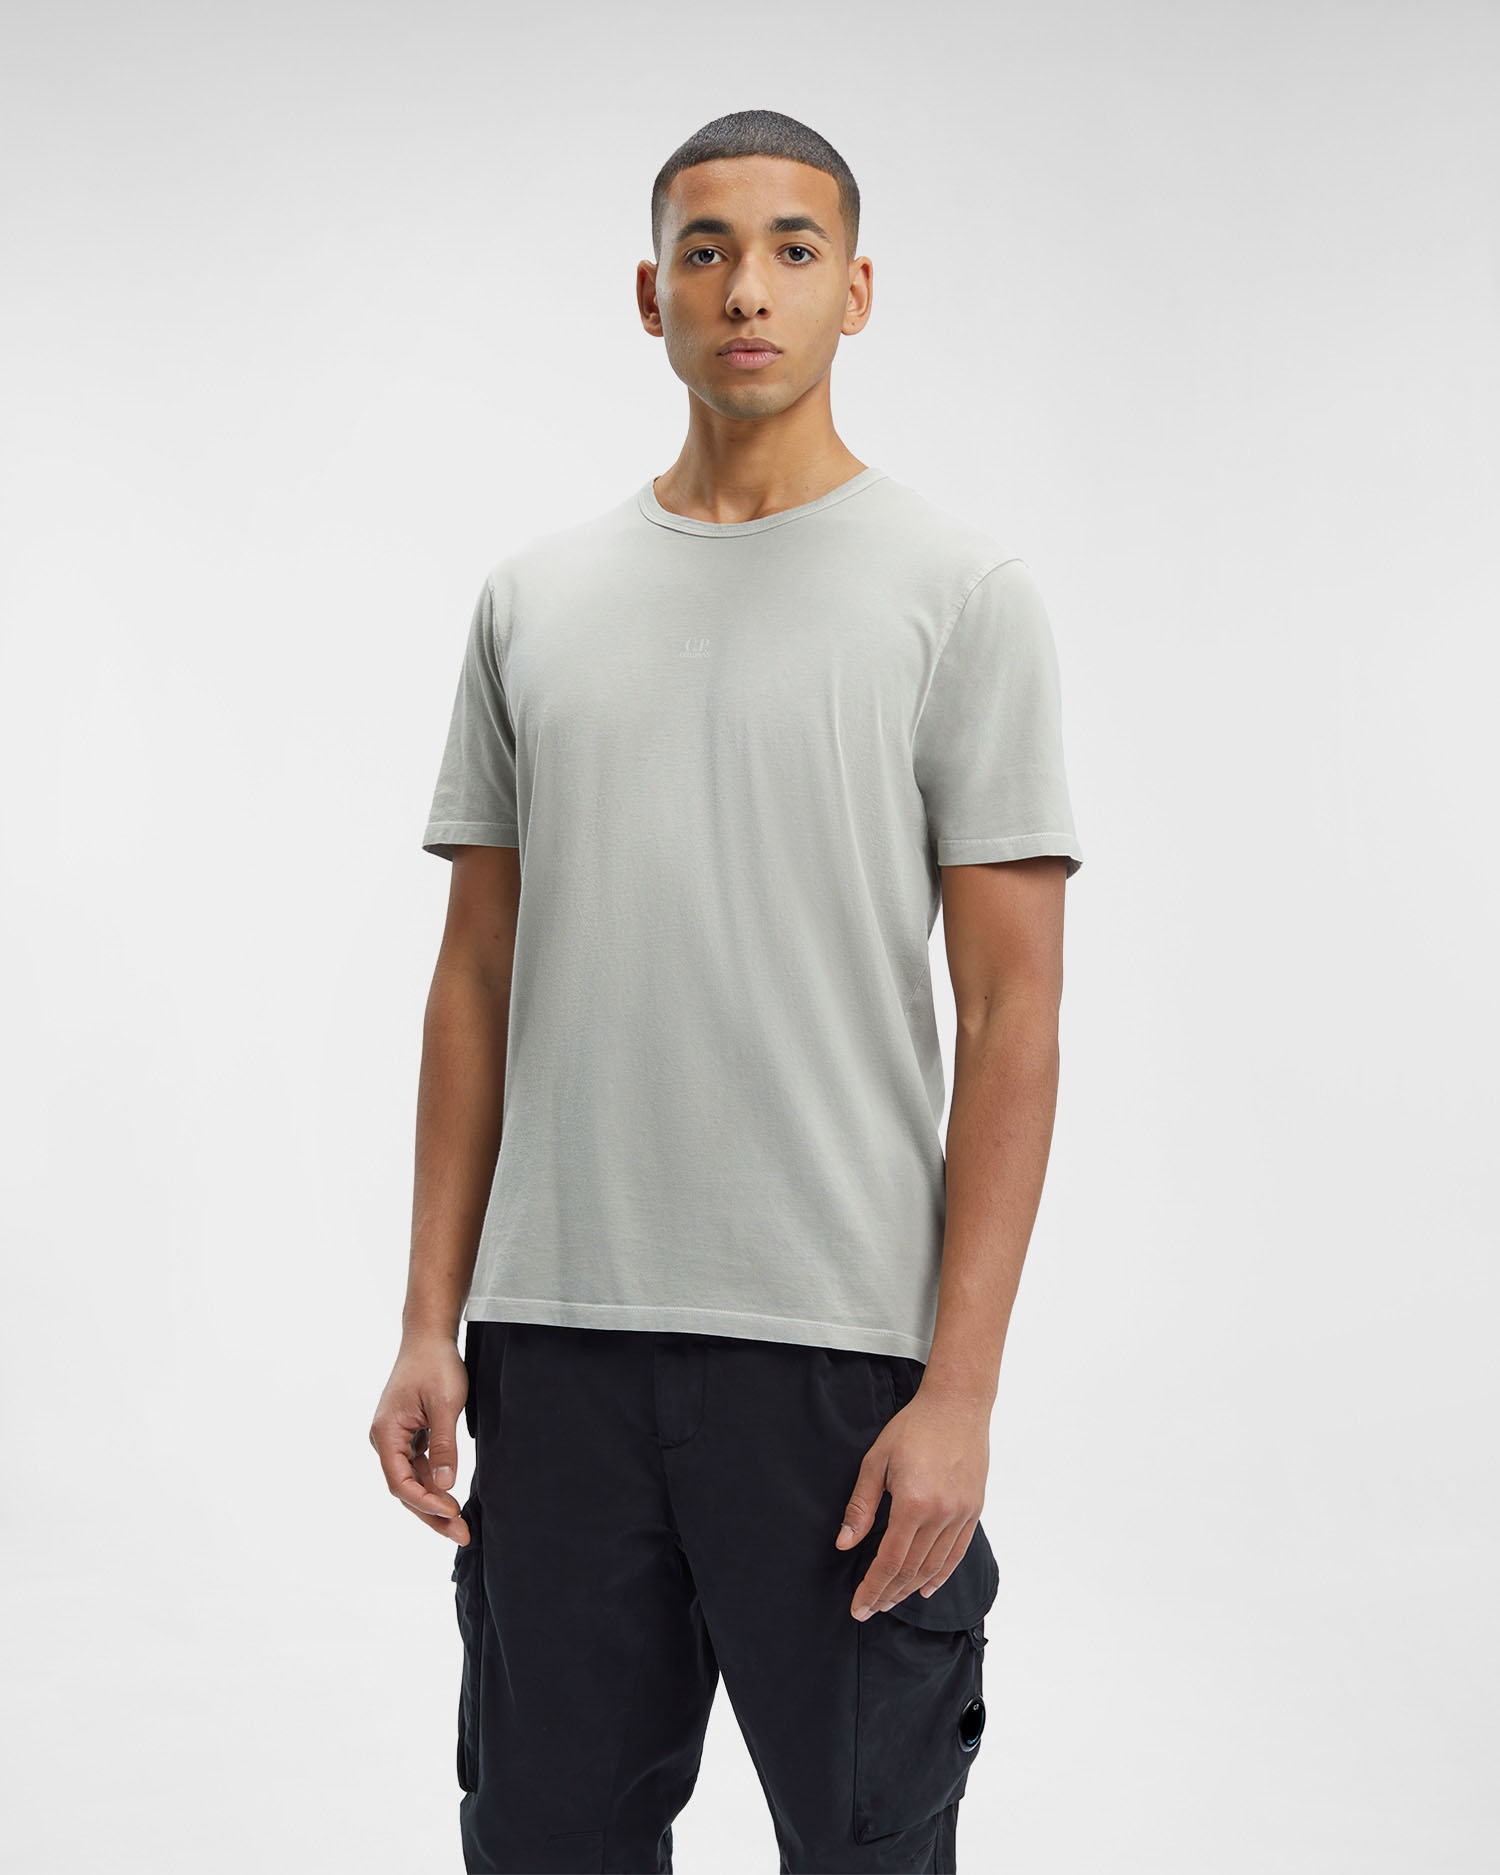 24/1 Jersey Relaxed Resist Dyed T-shirt | C.P. Company Online Store